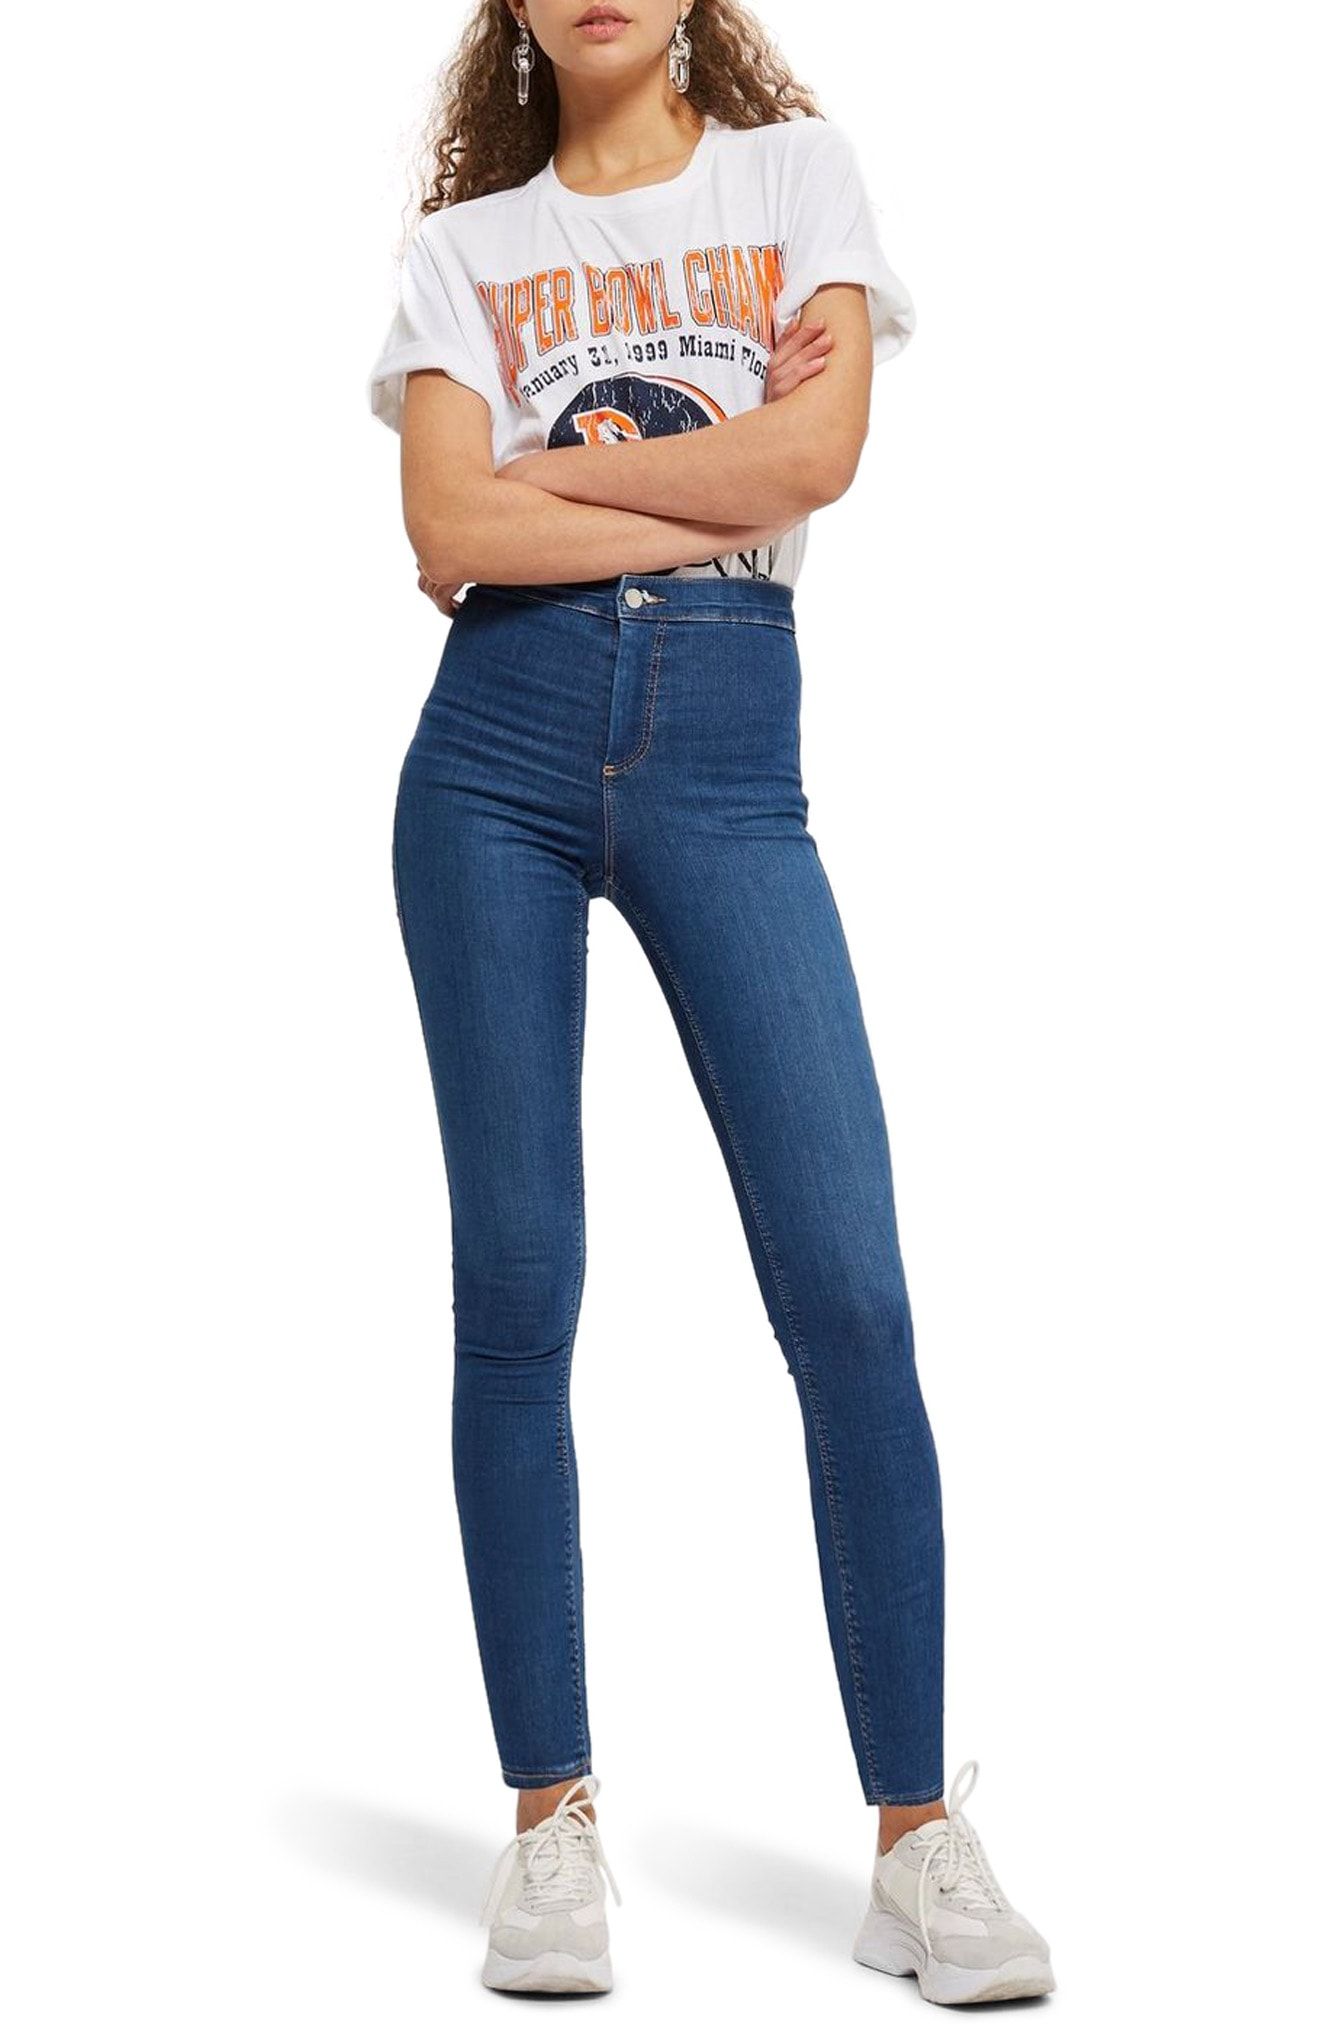 top rated high waisted jeans